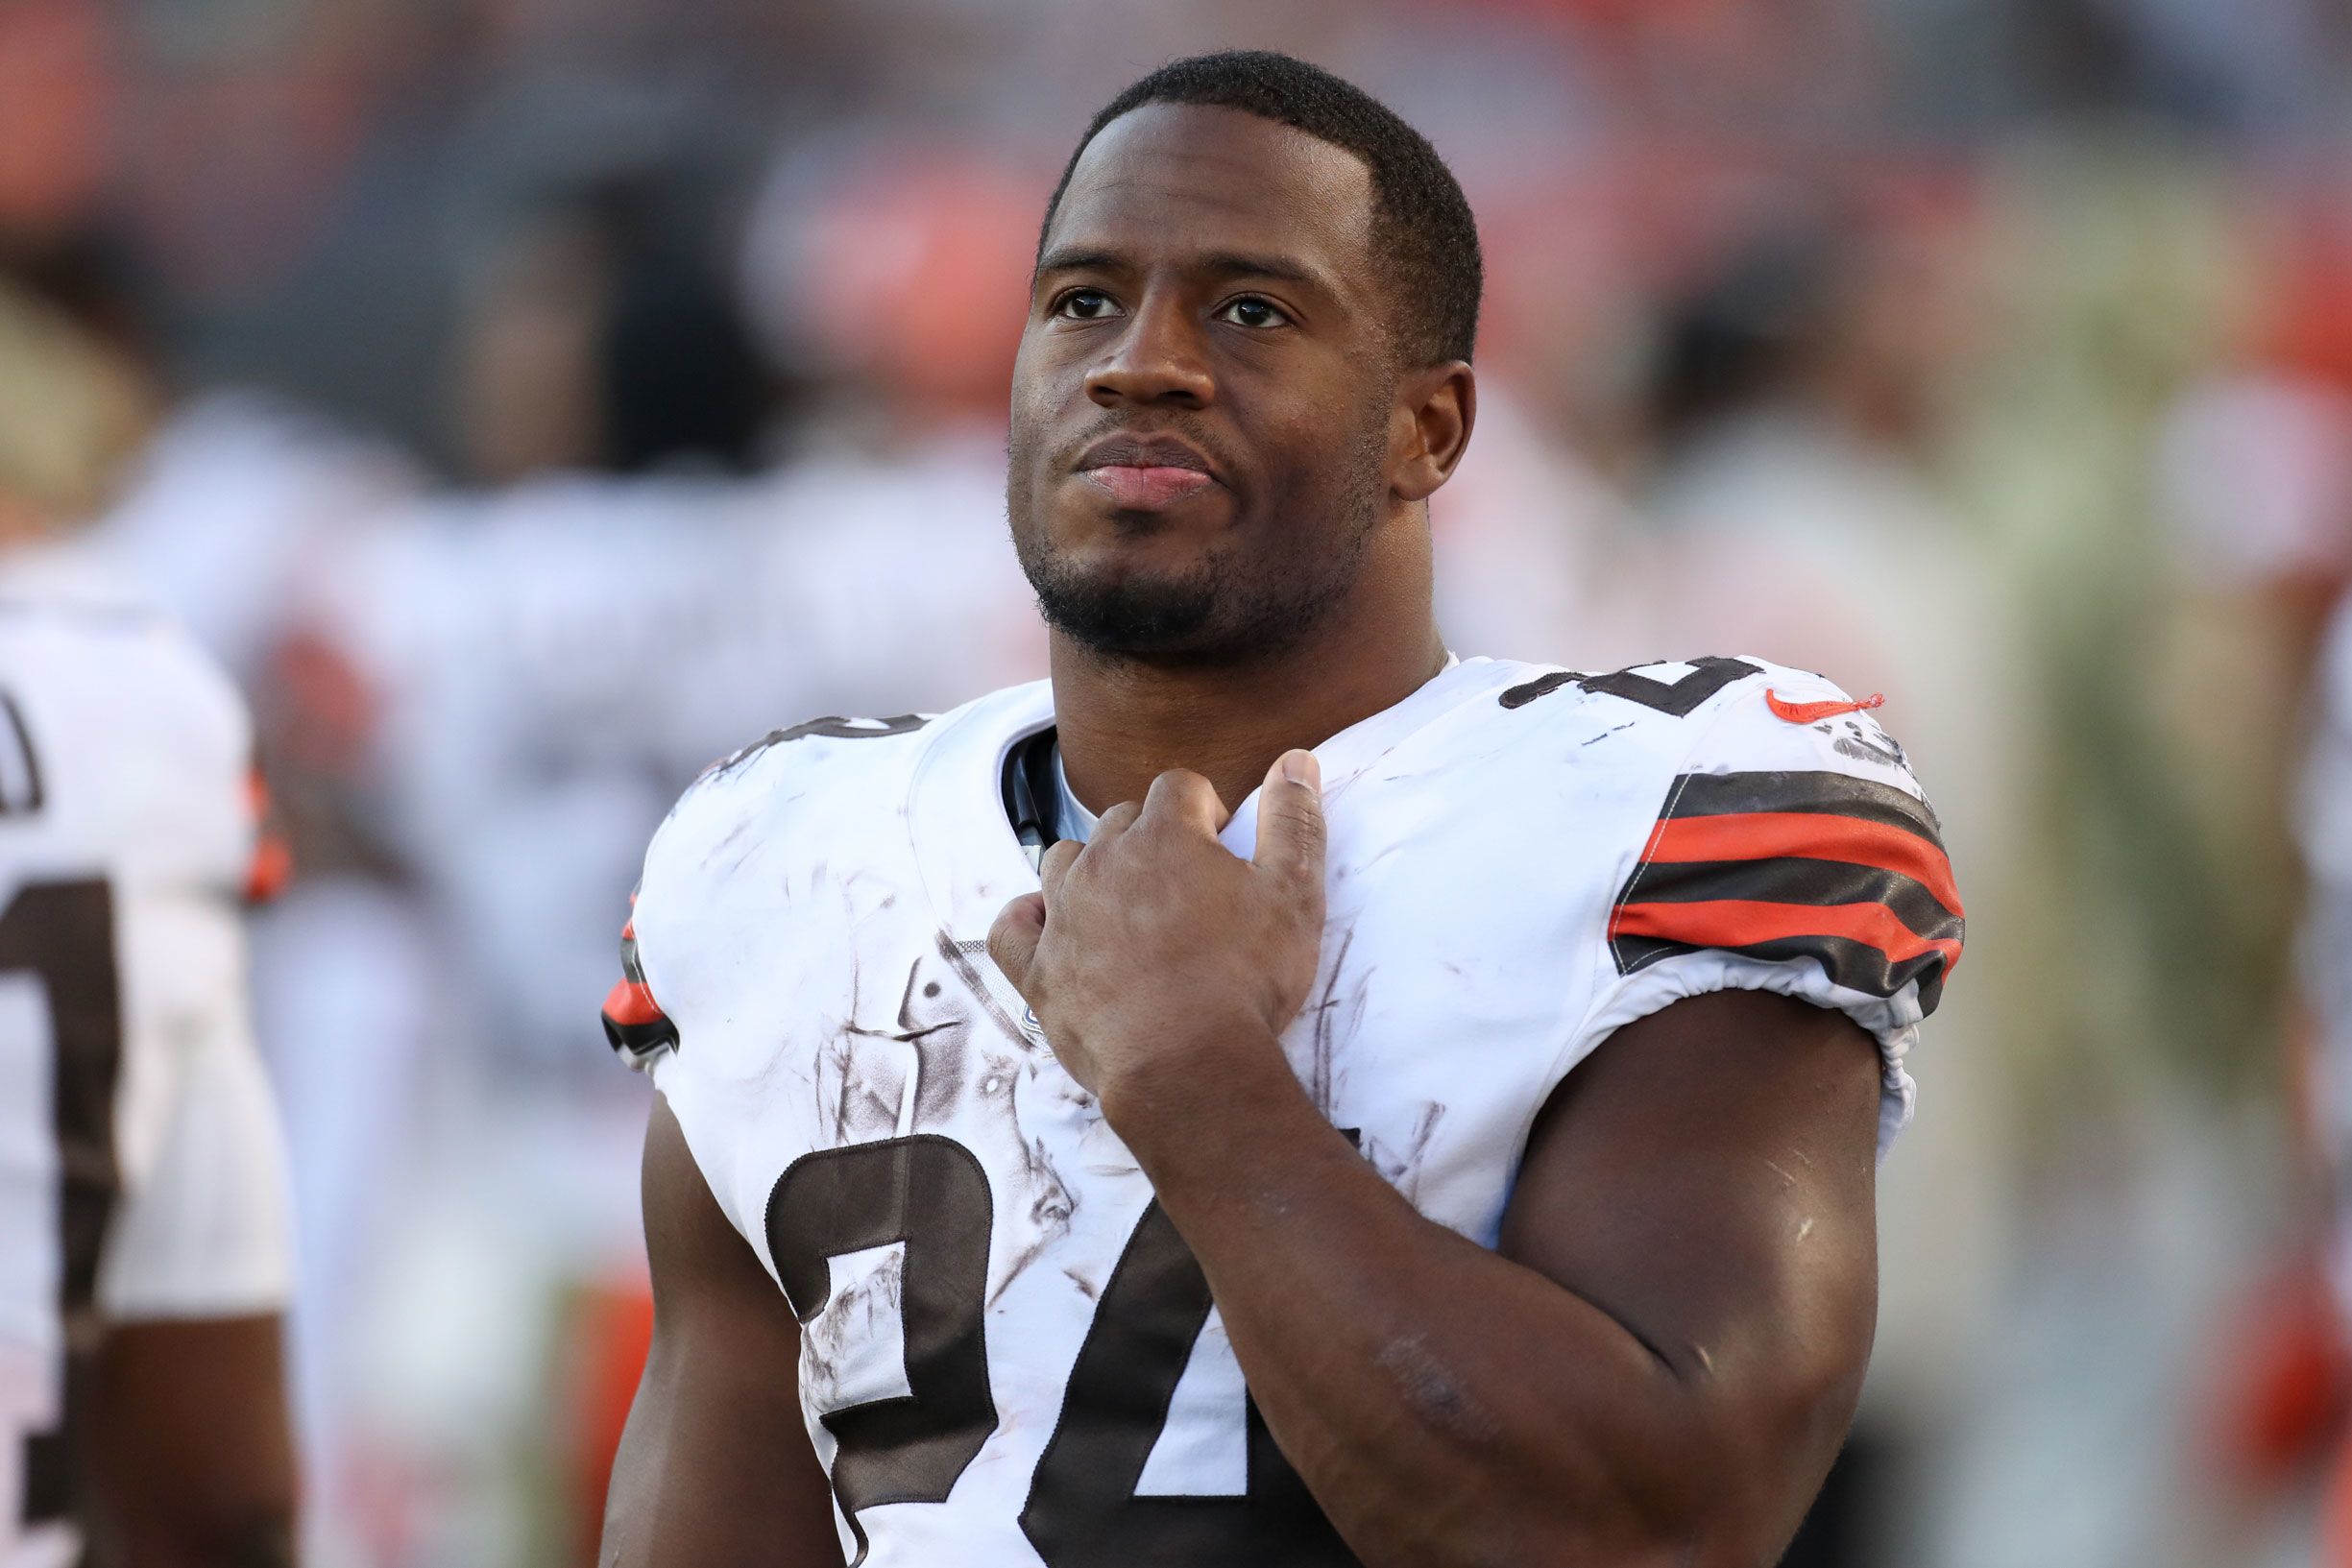 Cleveland Browns: Star Nick Chubb and two other running backs out due to  Covid-19 protocols